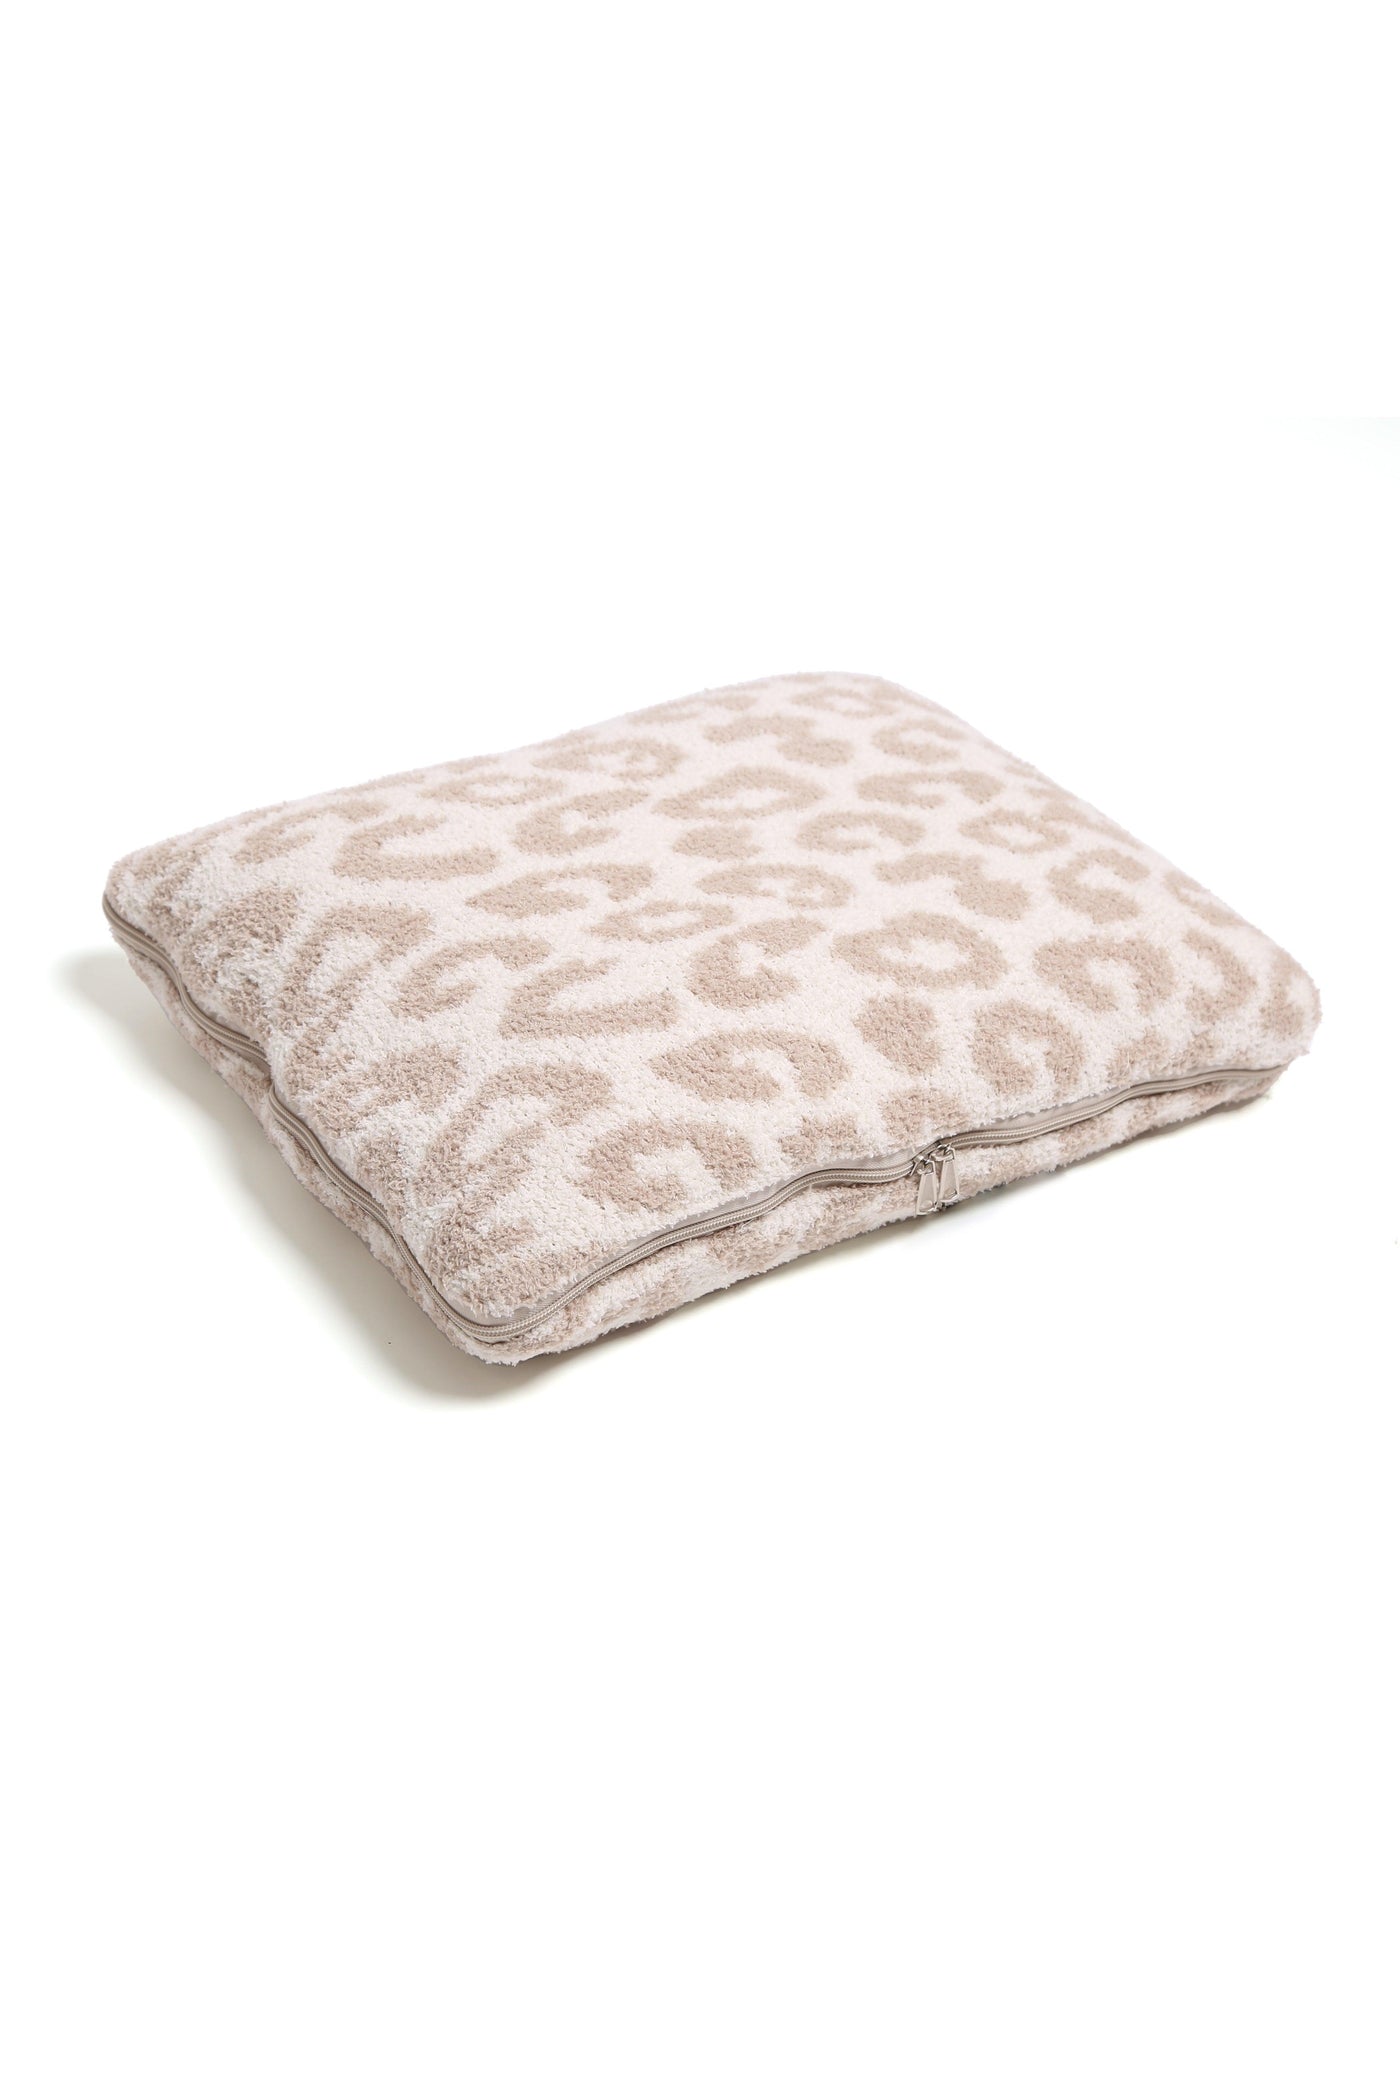 WINTER DREAMS 2 IN 1 TRAVEL BLANKET AND PILLOW , Blankets , it’sNOMB. The Label , 2 IN 1 BLANKET AND PILLOW, barefoot, barefoot dreams, BAREFOOT DREAMS TRAVEL BLANKET, blanket, blankets, christmas present, it's nomb, ITSNOMB, leopard, leopard print, pattern, prints, stocking stuffers, throw, throw blanket, throw blankets, throws , It's NOMB , itsnomb.com